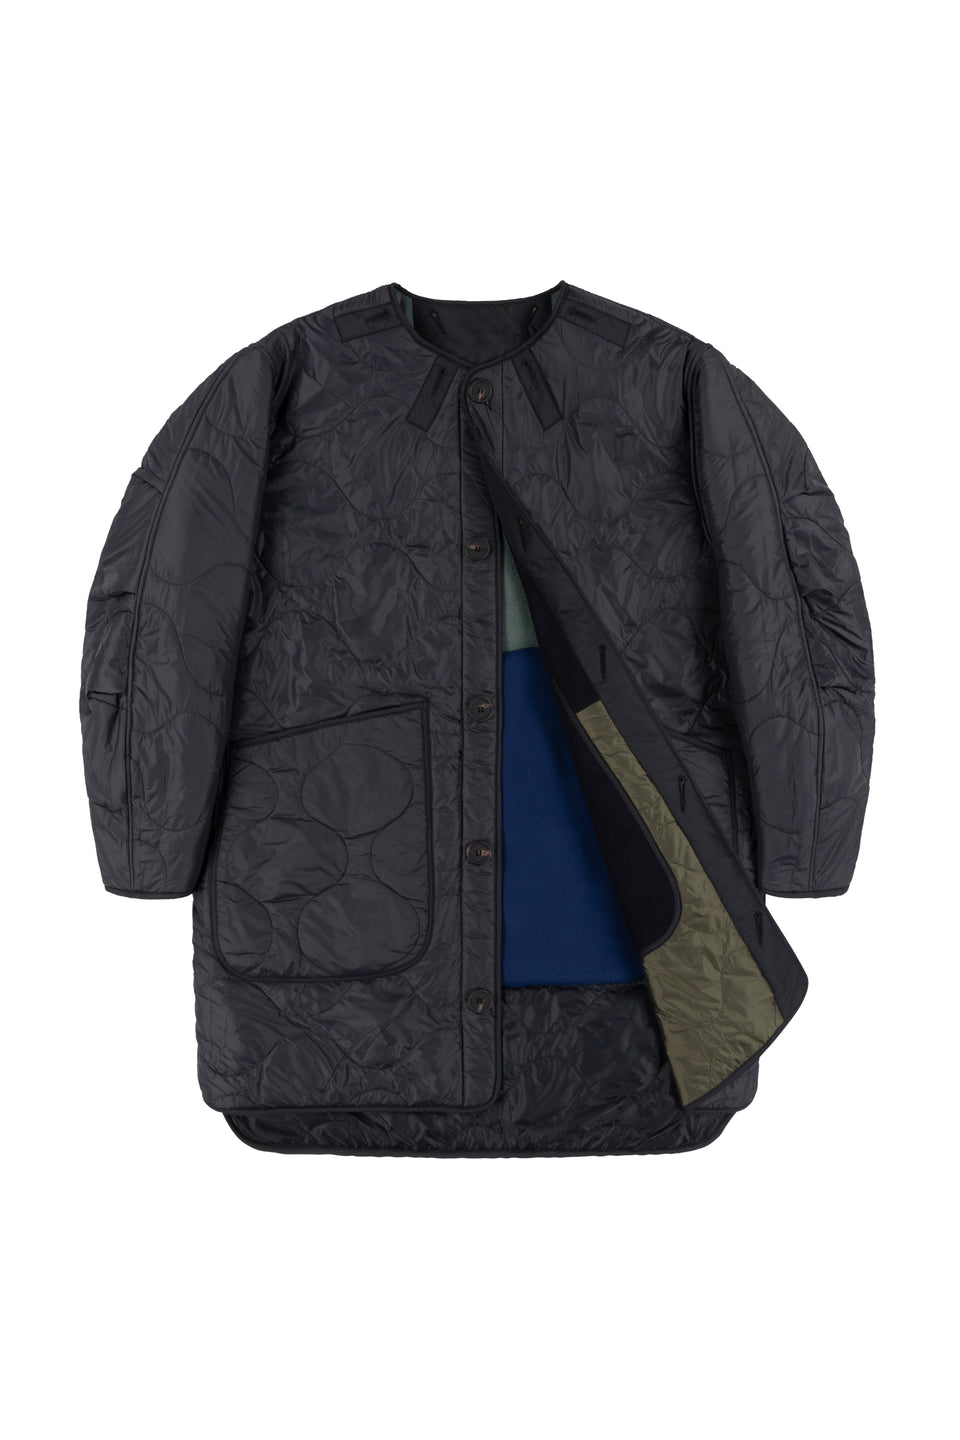 Wool Patchwork Signature Quilt Jacket - Navy / Black (listing page thumbnail)